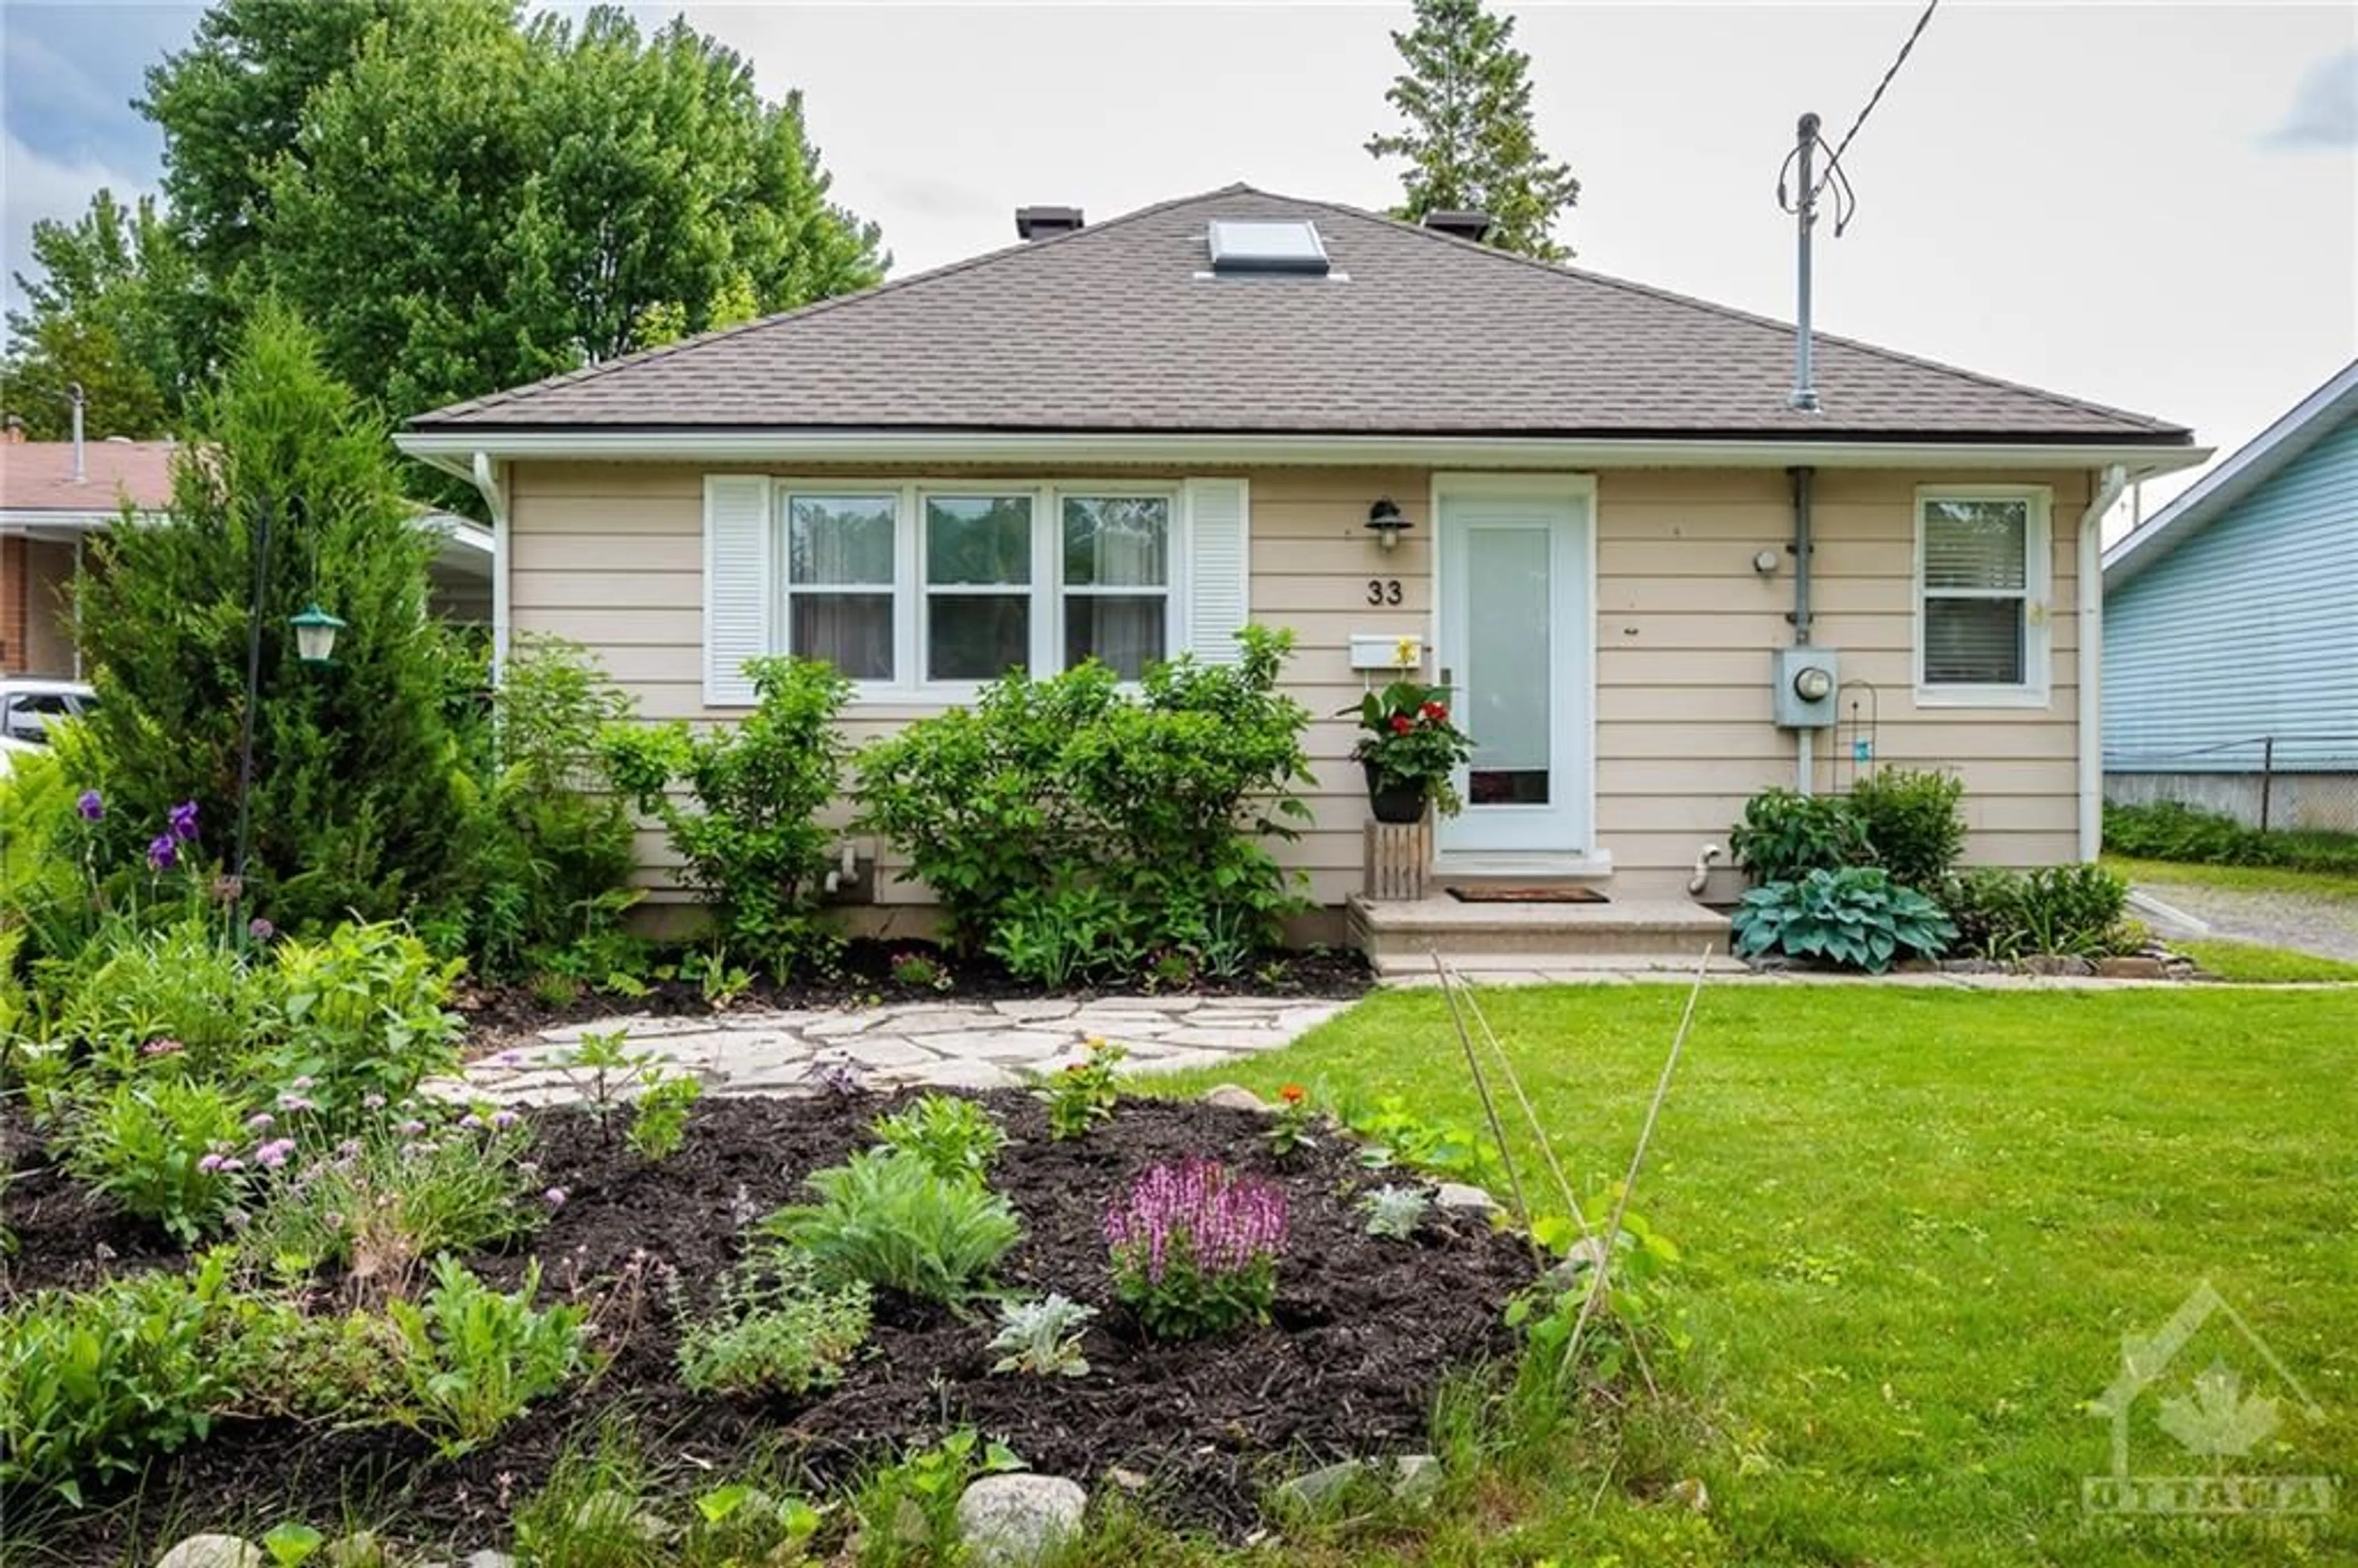 Cottage for 33 WYLIE Ave, Ottawa Ontario K2B 6M3